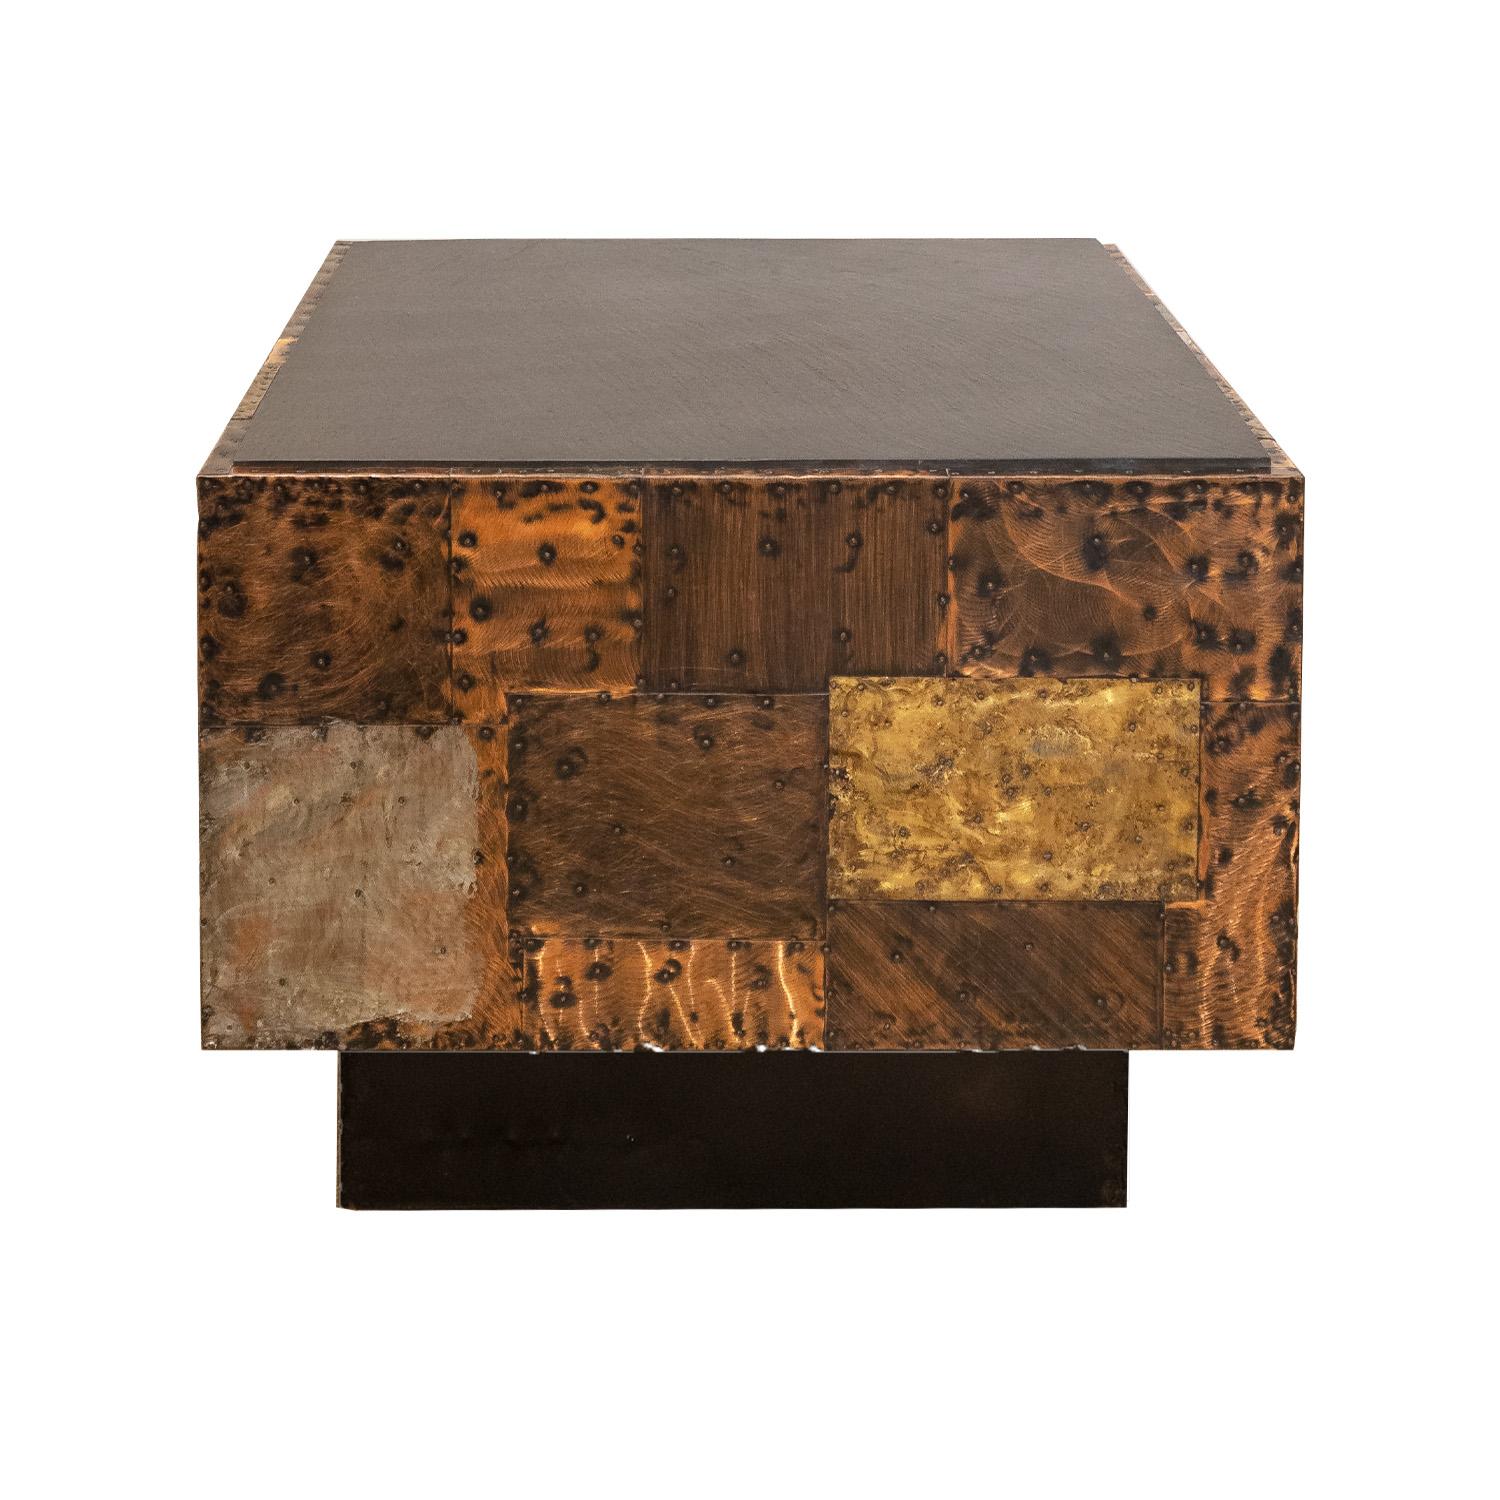 Patchwork Side Table, model PE-31, in enameled and patinated copper, brass and steel over plywood with an inset cleft slate top by Paul Evans for Directional Furniture, American 1970s.  This table is on recessed castors so it can be moved around